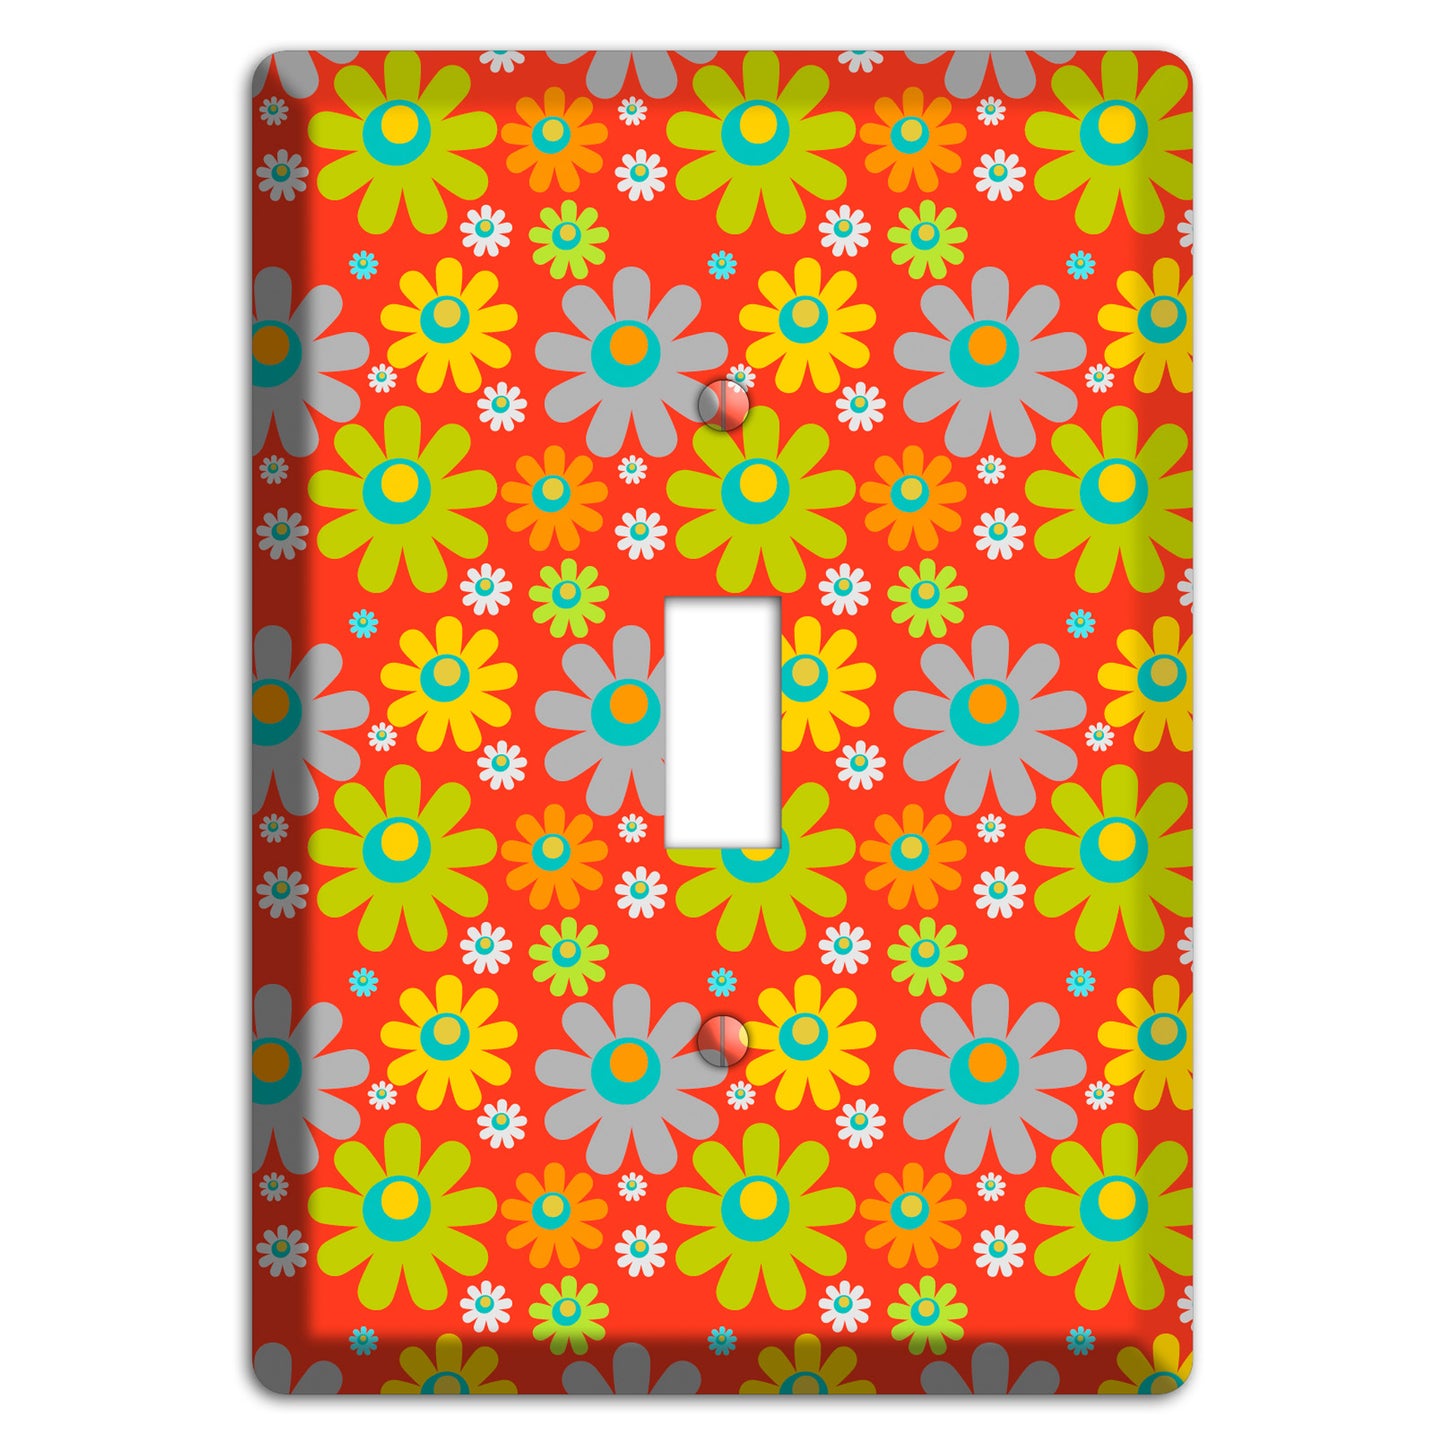 Orange and Yellow Flower Power Cover Plates